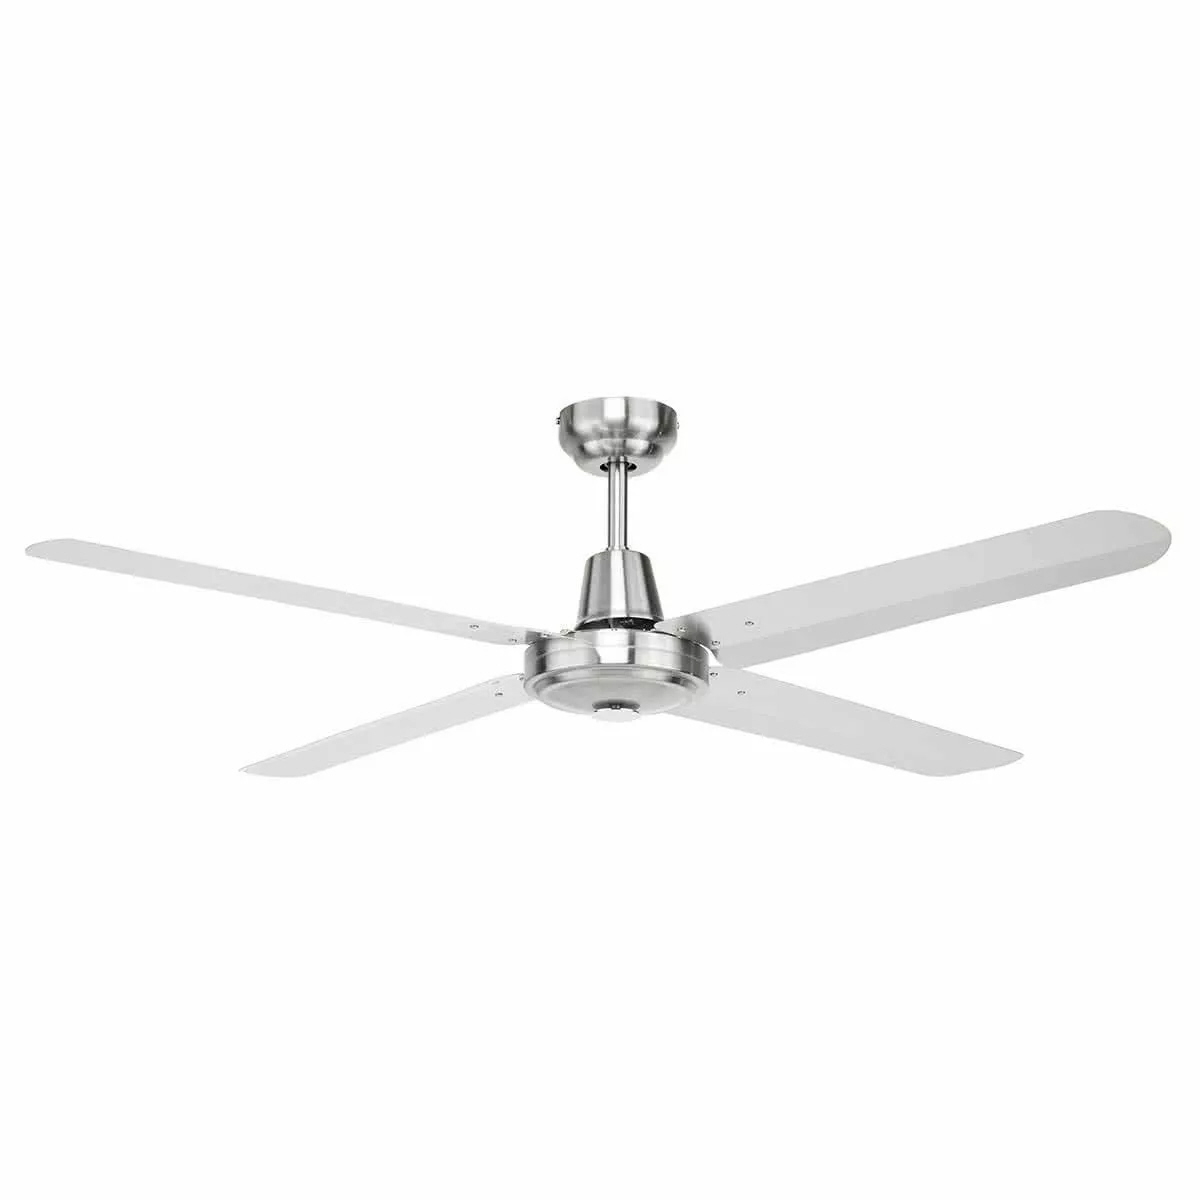 Atrium-AC-Ceiling-Fan-stainless-steel-with-stainless-blades